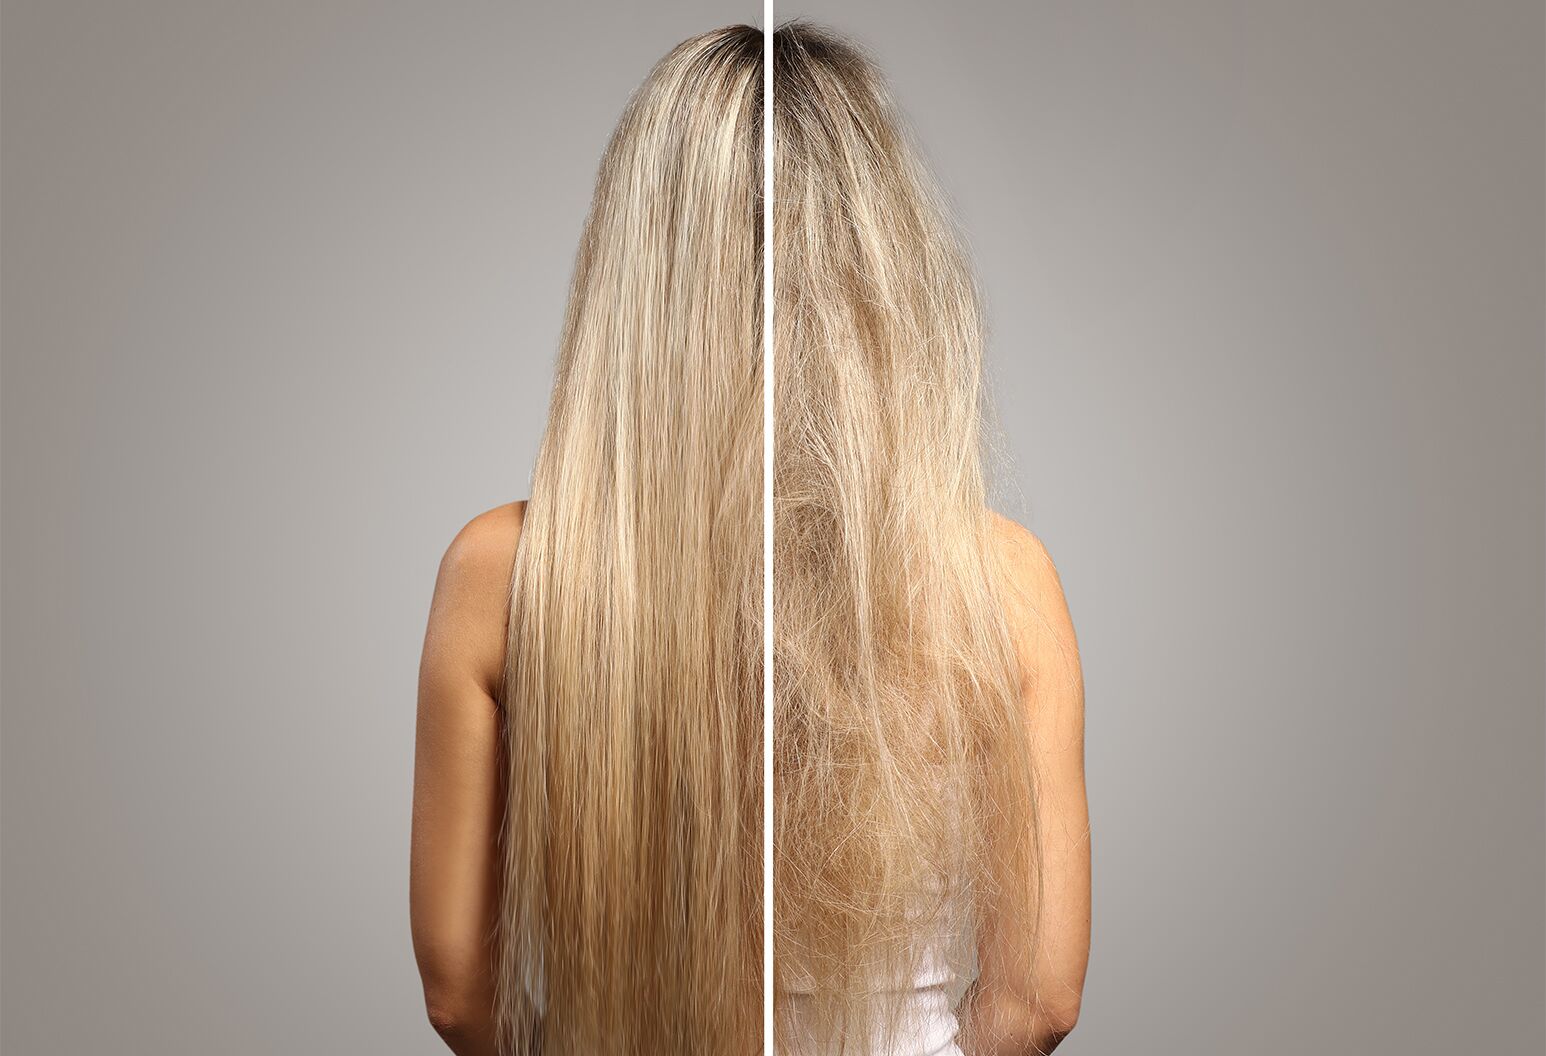 Know The Risks Of Keratin Treatments | The Well by Northwell